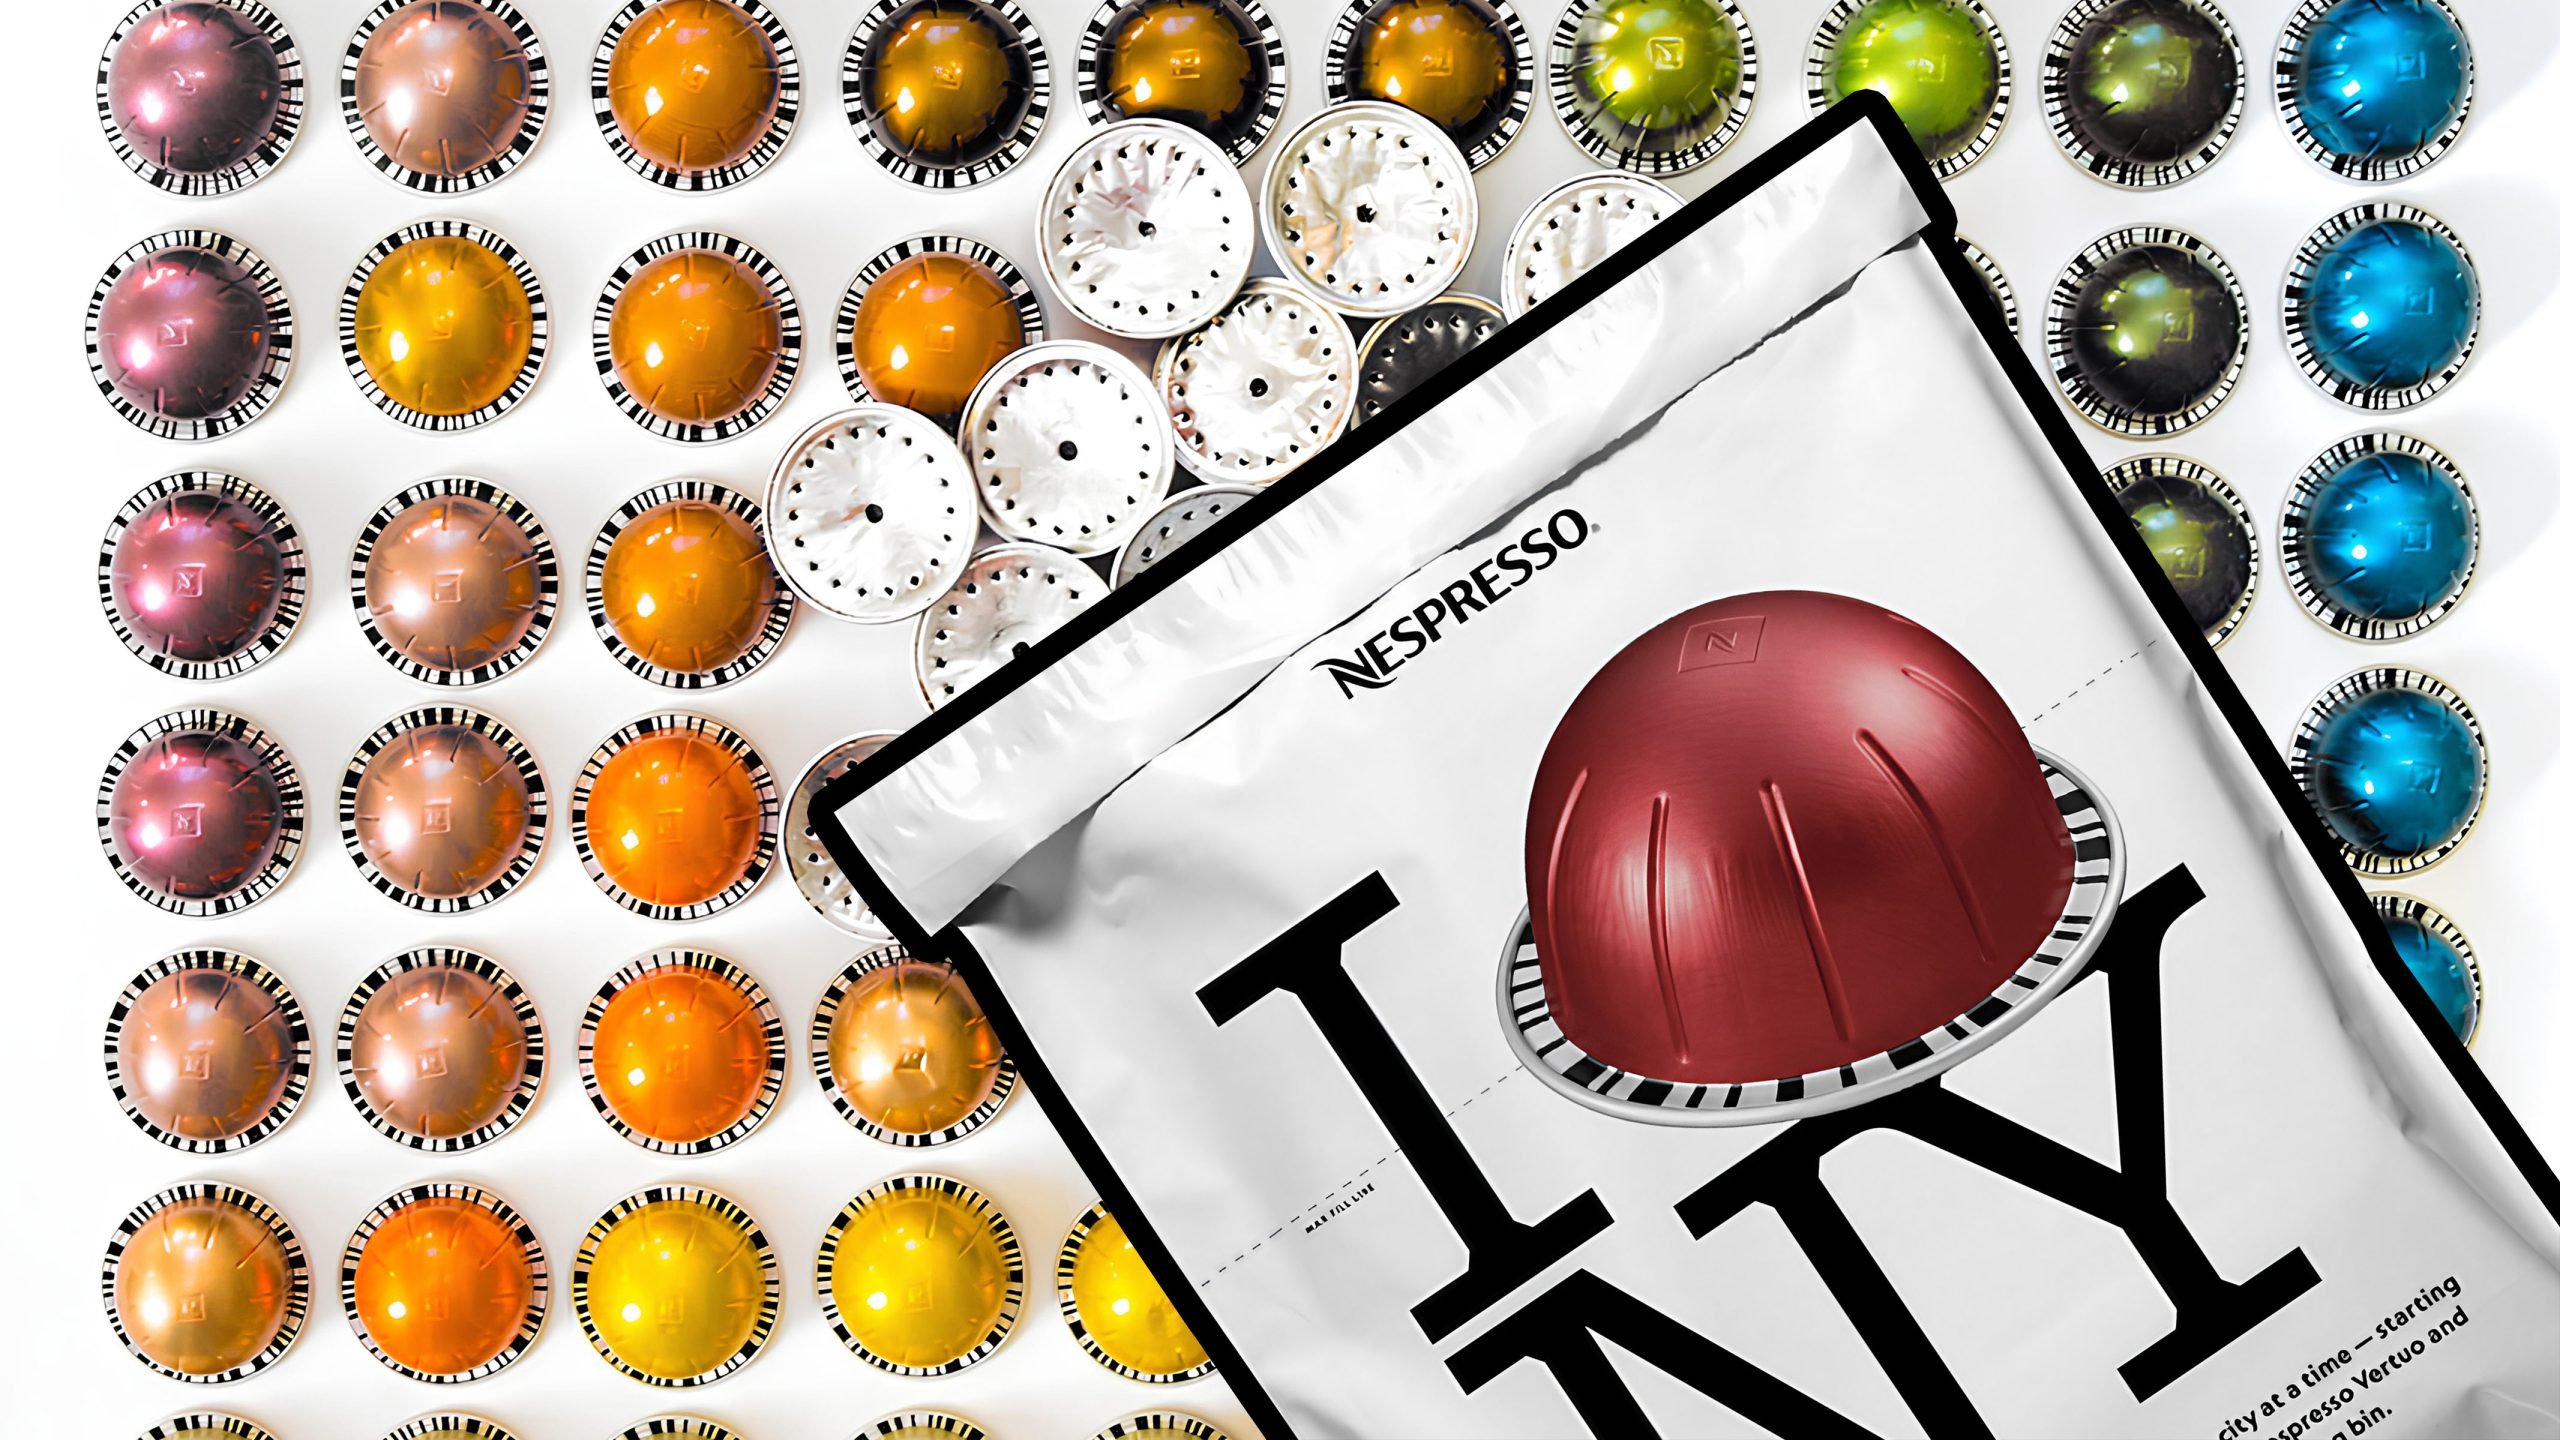 Nespresso is Giving New York Customers Recycling Bags They Don’t Actually Want Them to Use